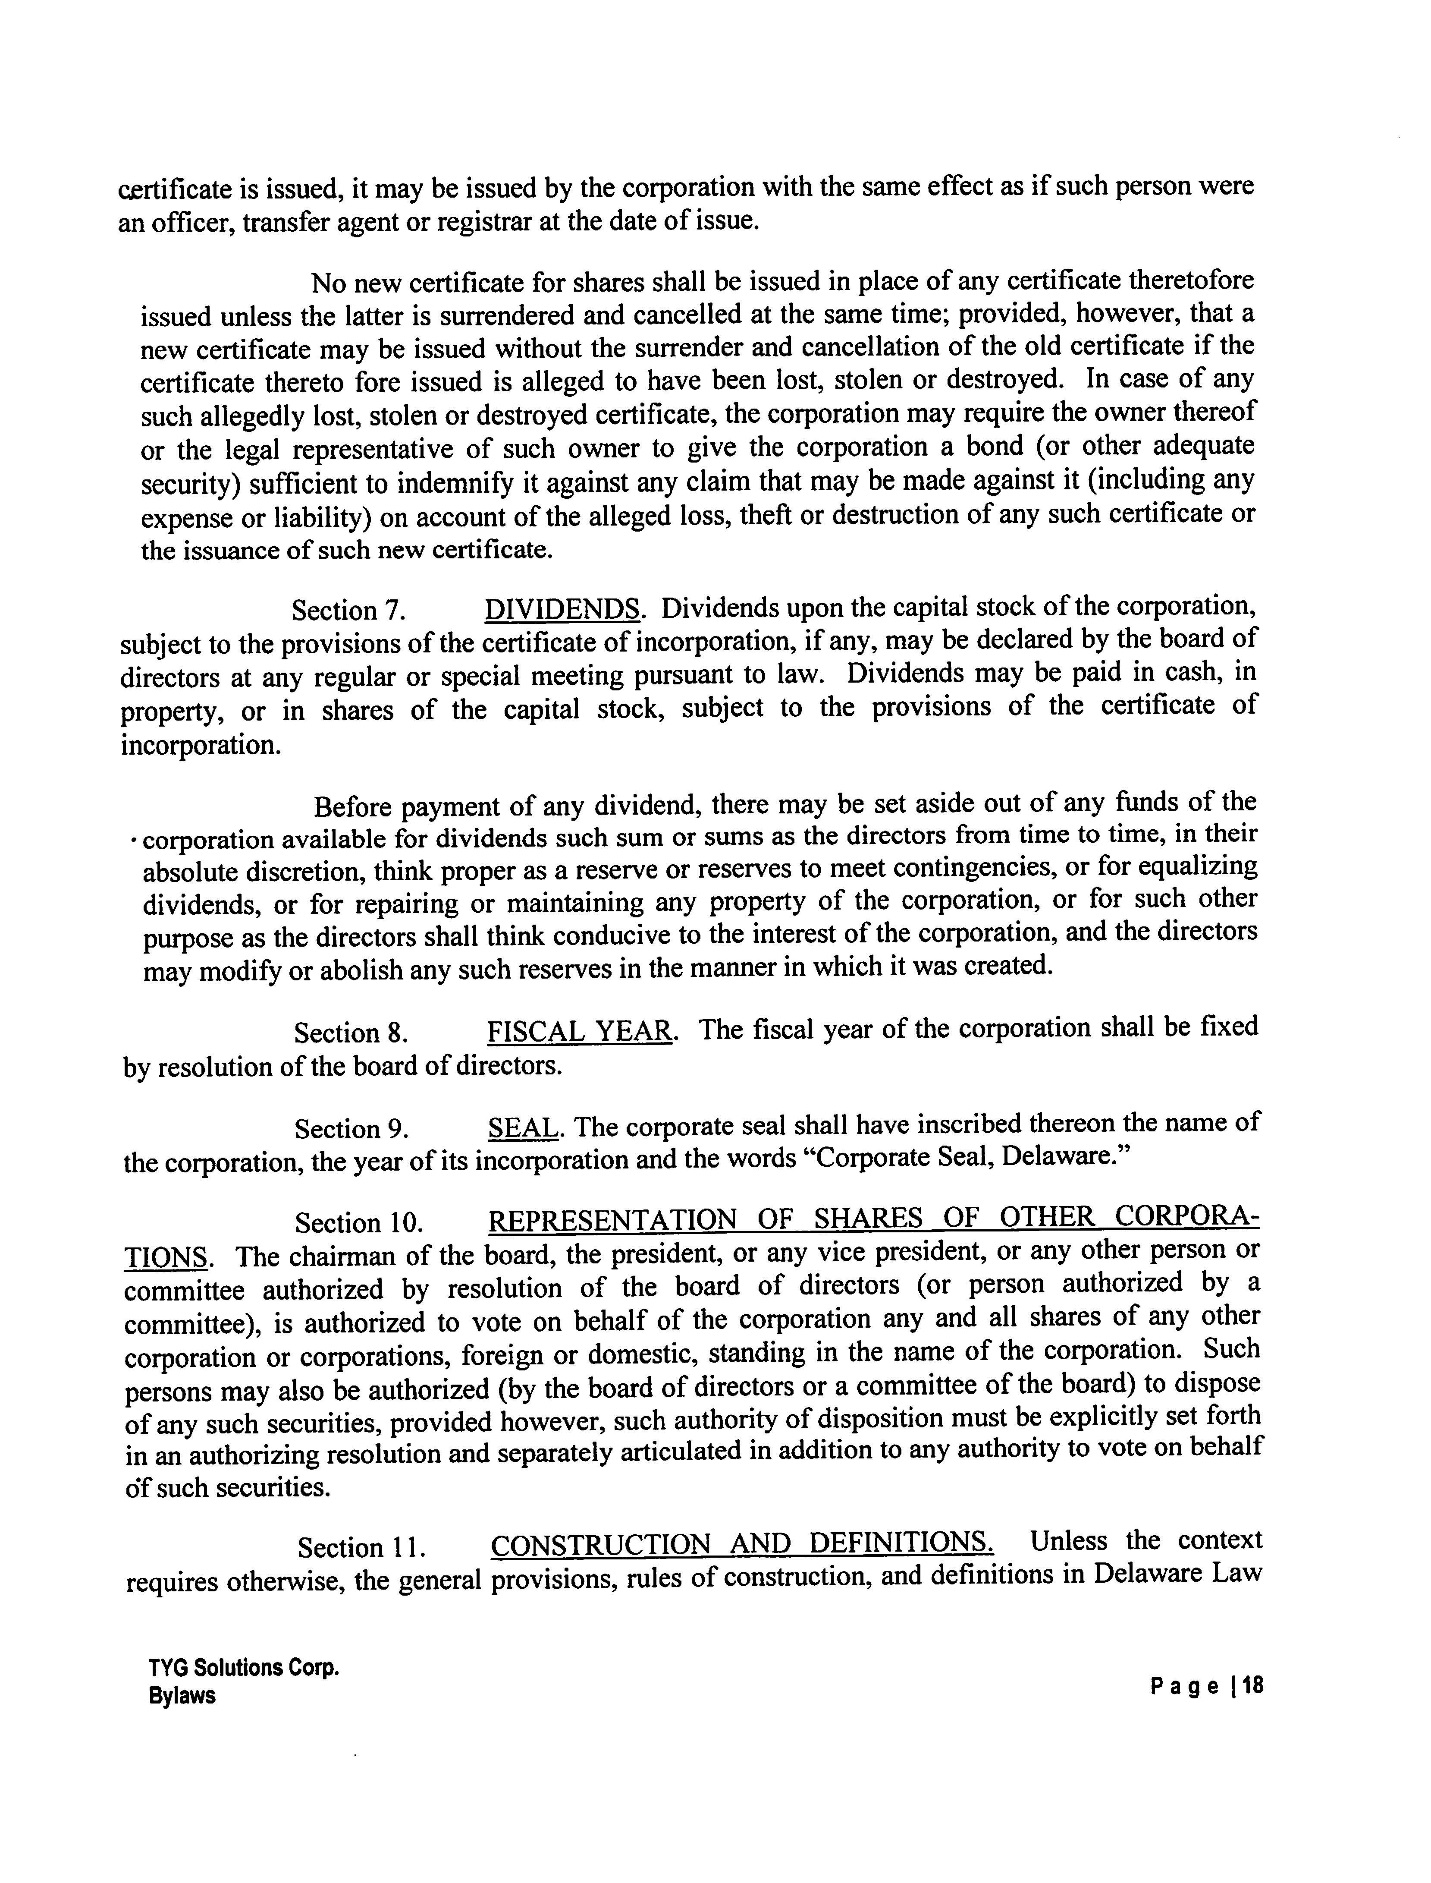 Ex. 3.3 Amended Articles and Bylaws_Page_18.jpg